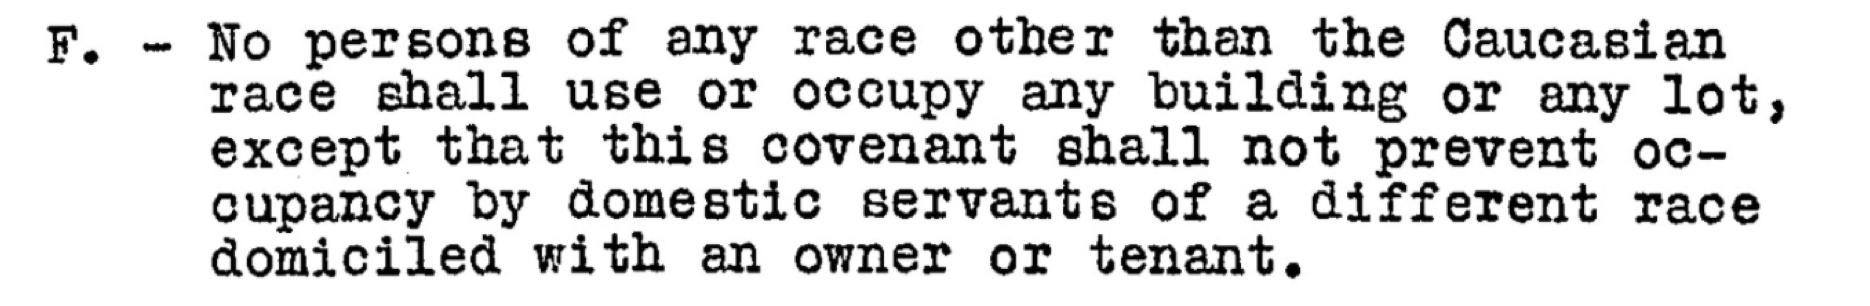 example of text in racial covenant